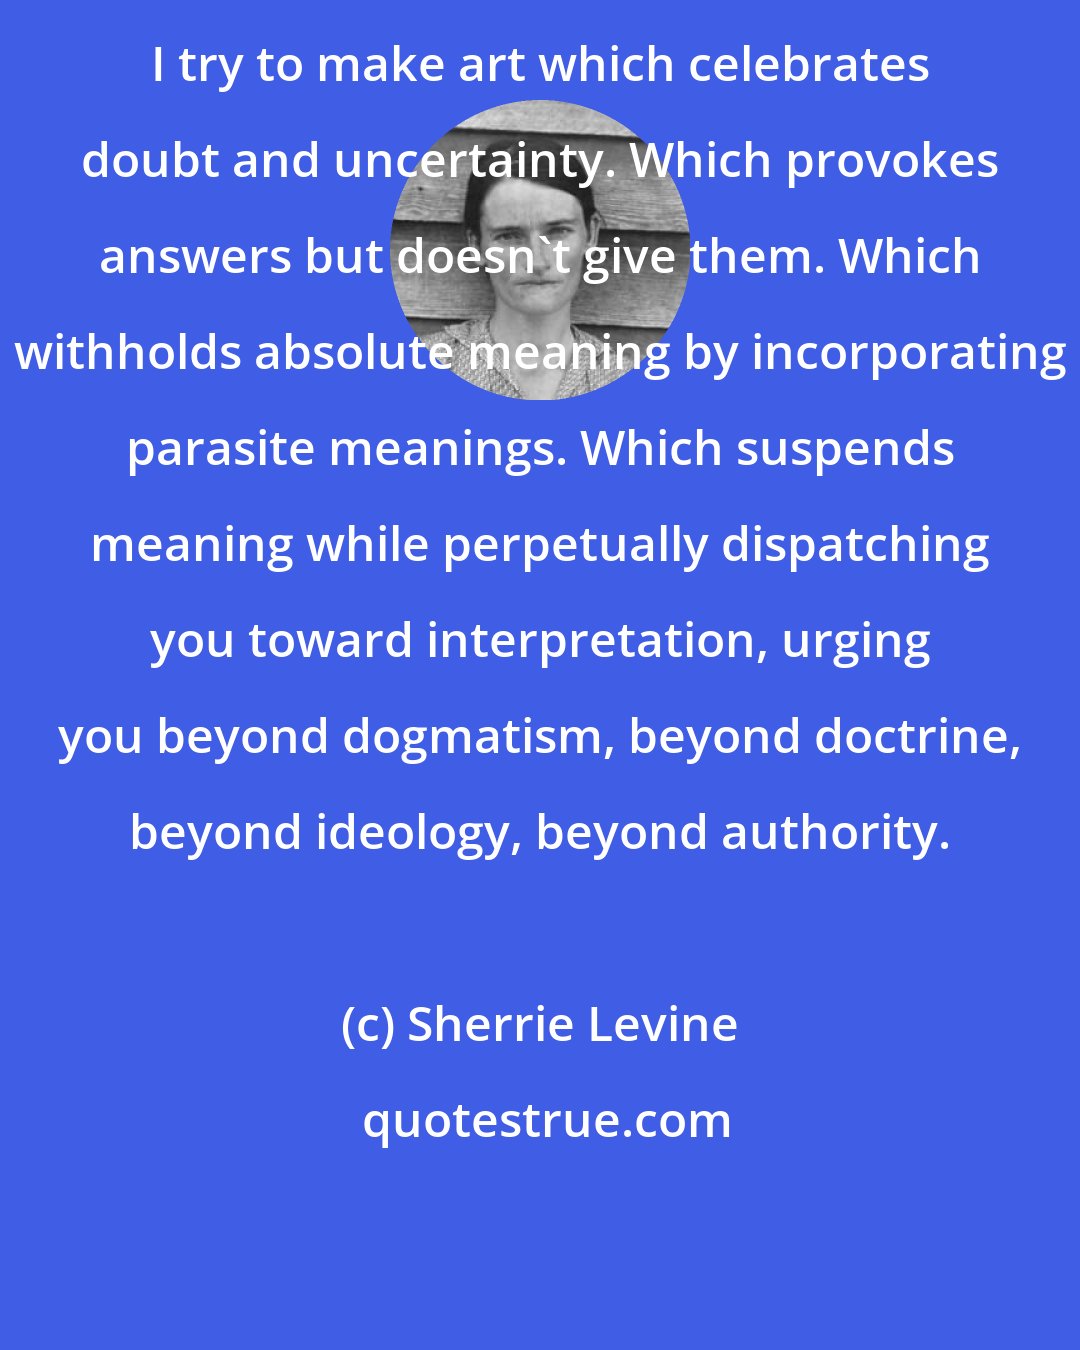 Sherrie Levine: I try to make art which celebrates doubt and uncertainty. Which provokes answers but doesn't give them. Which withholds absolute meaning by incorporating parasite meanings. Which suspends meaning while perpetually dispatching you toward interpretation, urging you beyond dogmatism, beyond doctrine, beyond ideology, beyond authority.